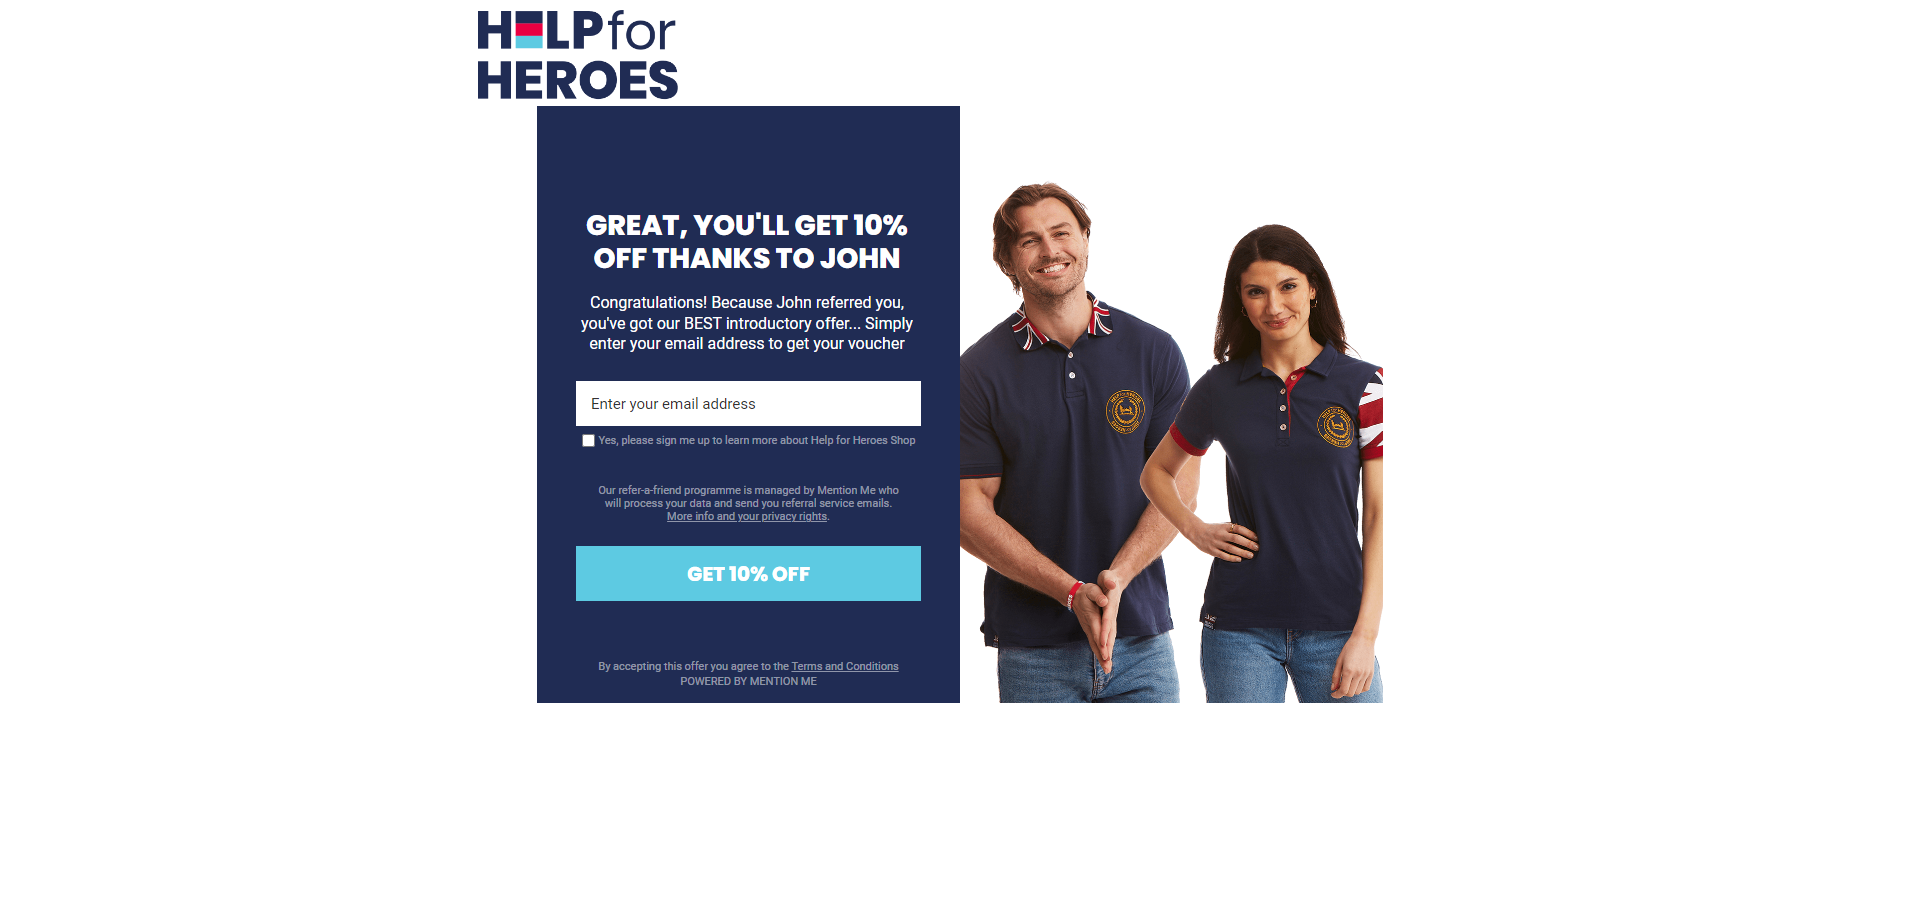 Referral Landing Page for Help For Heroes